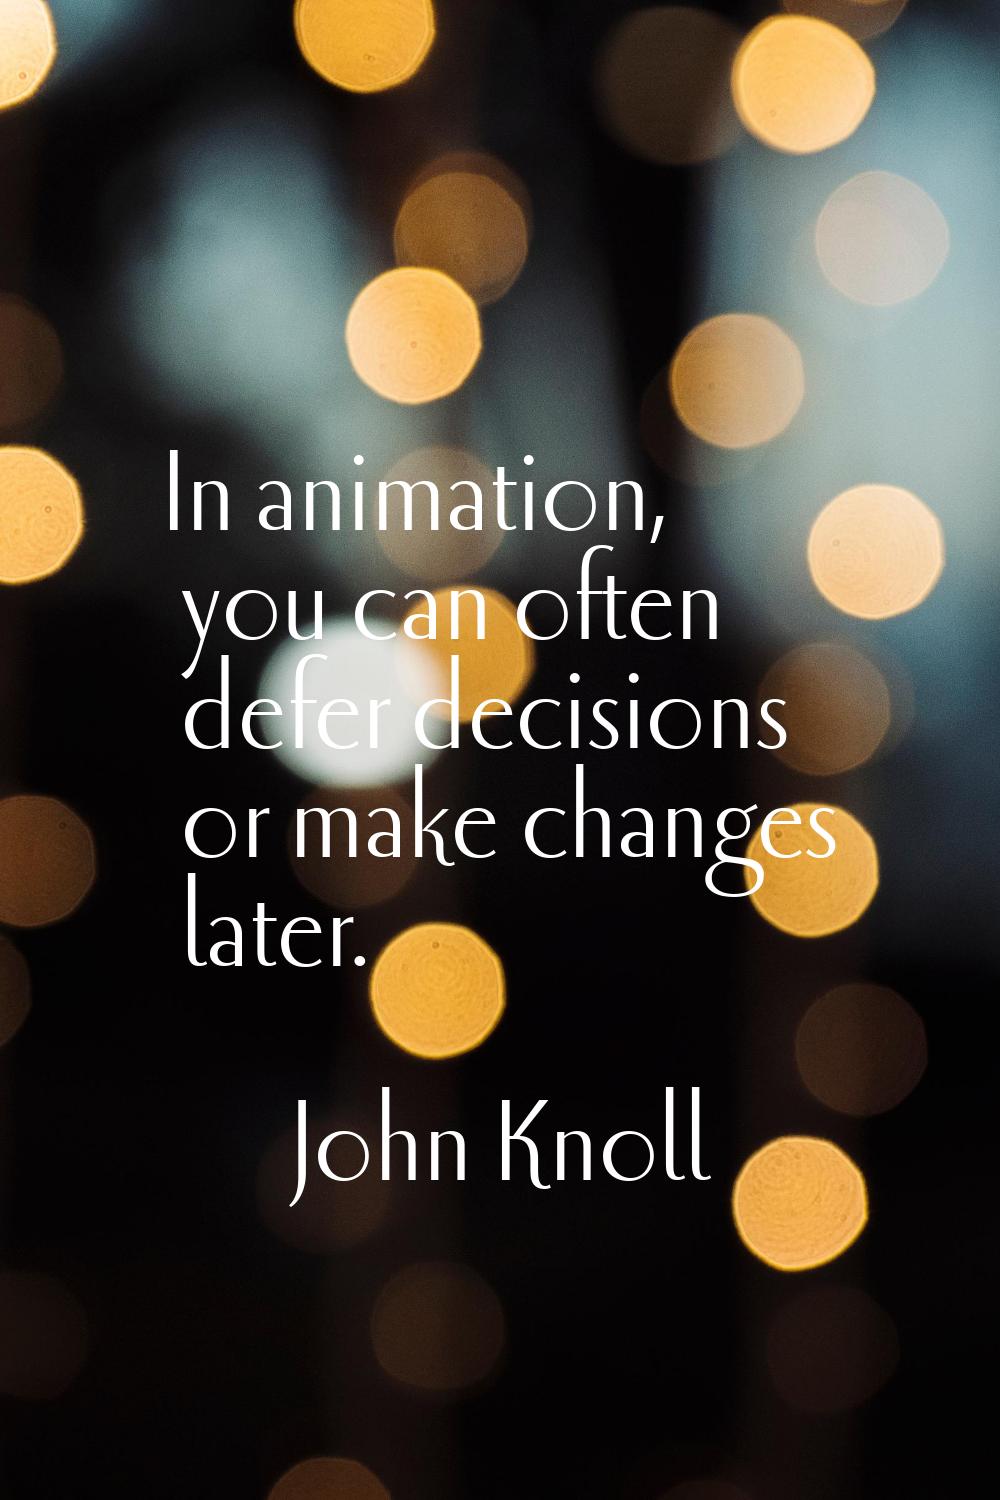 In animation, you can often defer decisions or make changes later.